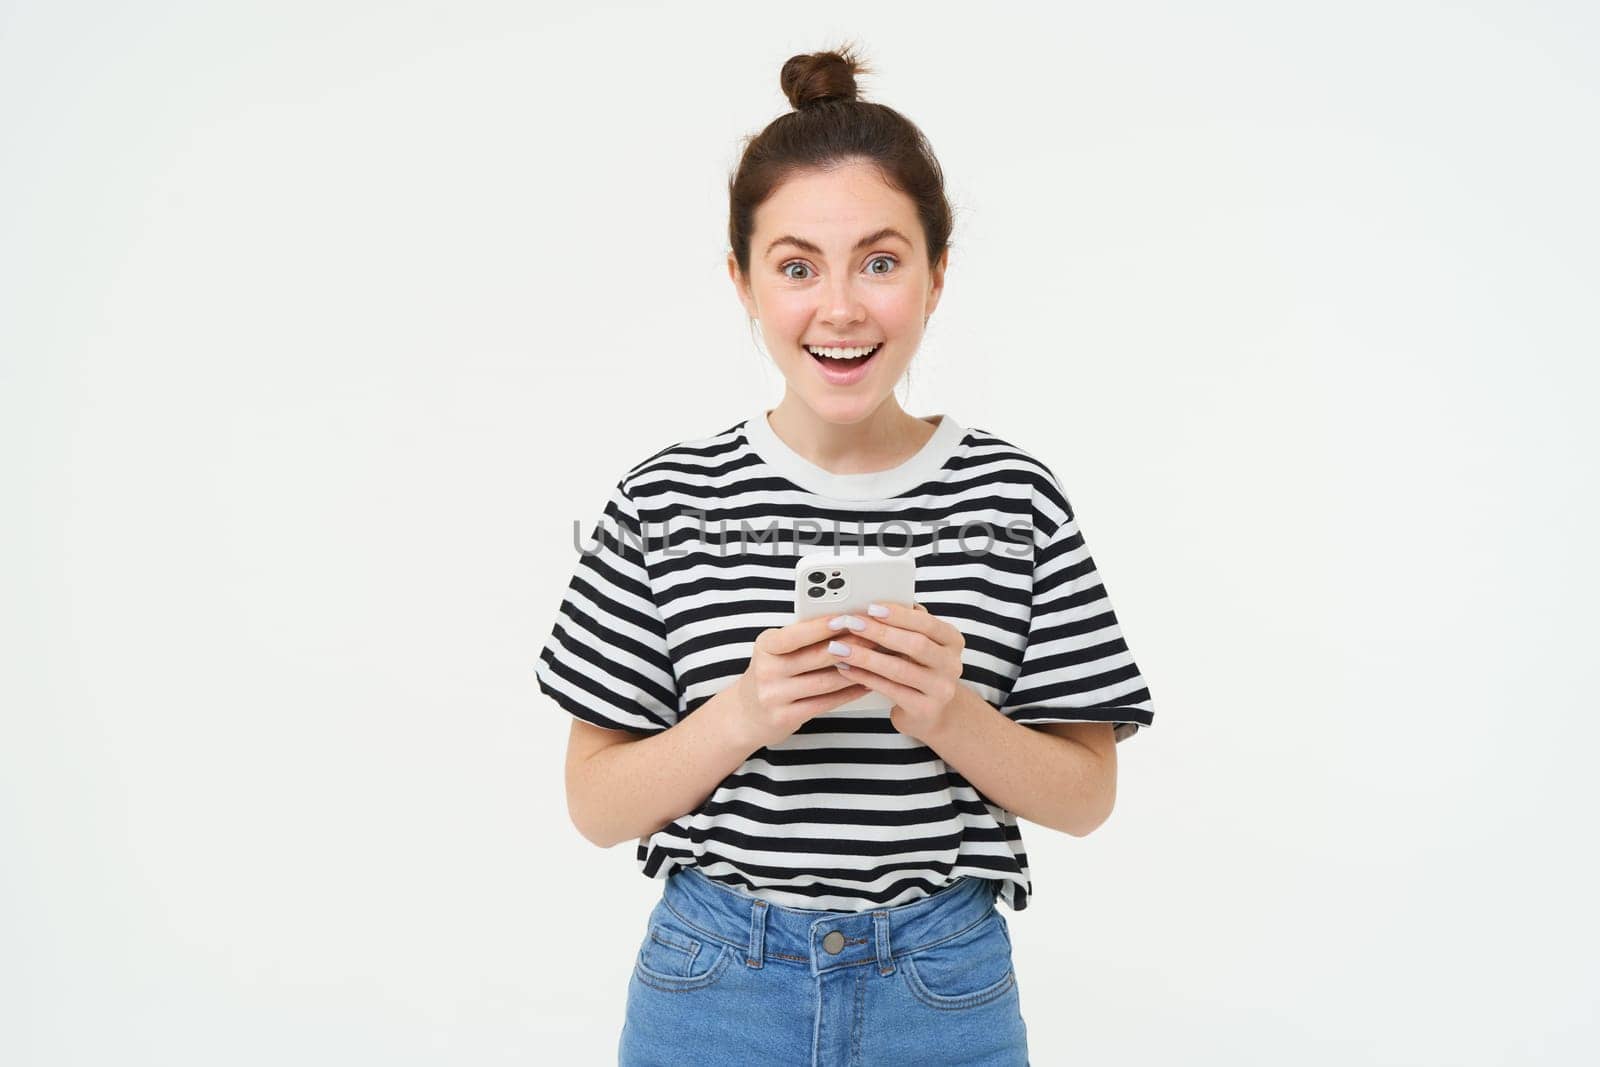 Technology and people concept. Young woman with mobile phone, smiling, using smartphone app, social media application, isolated over white background.